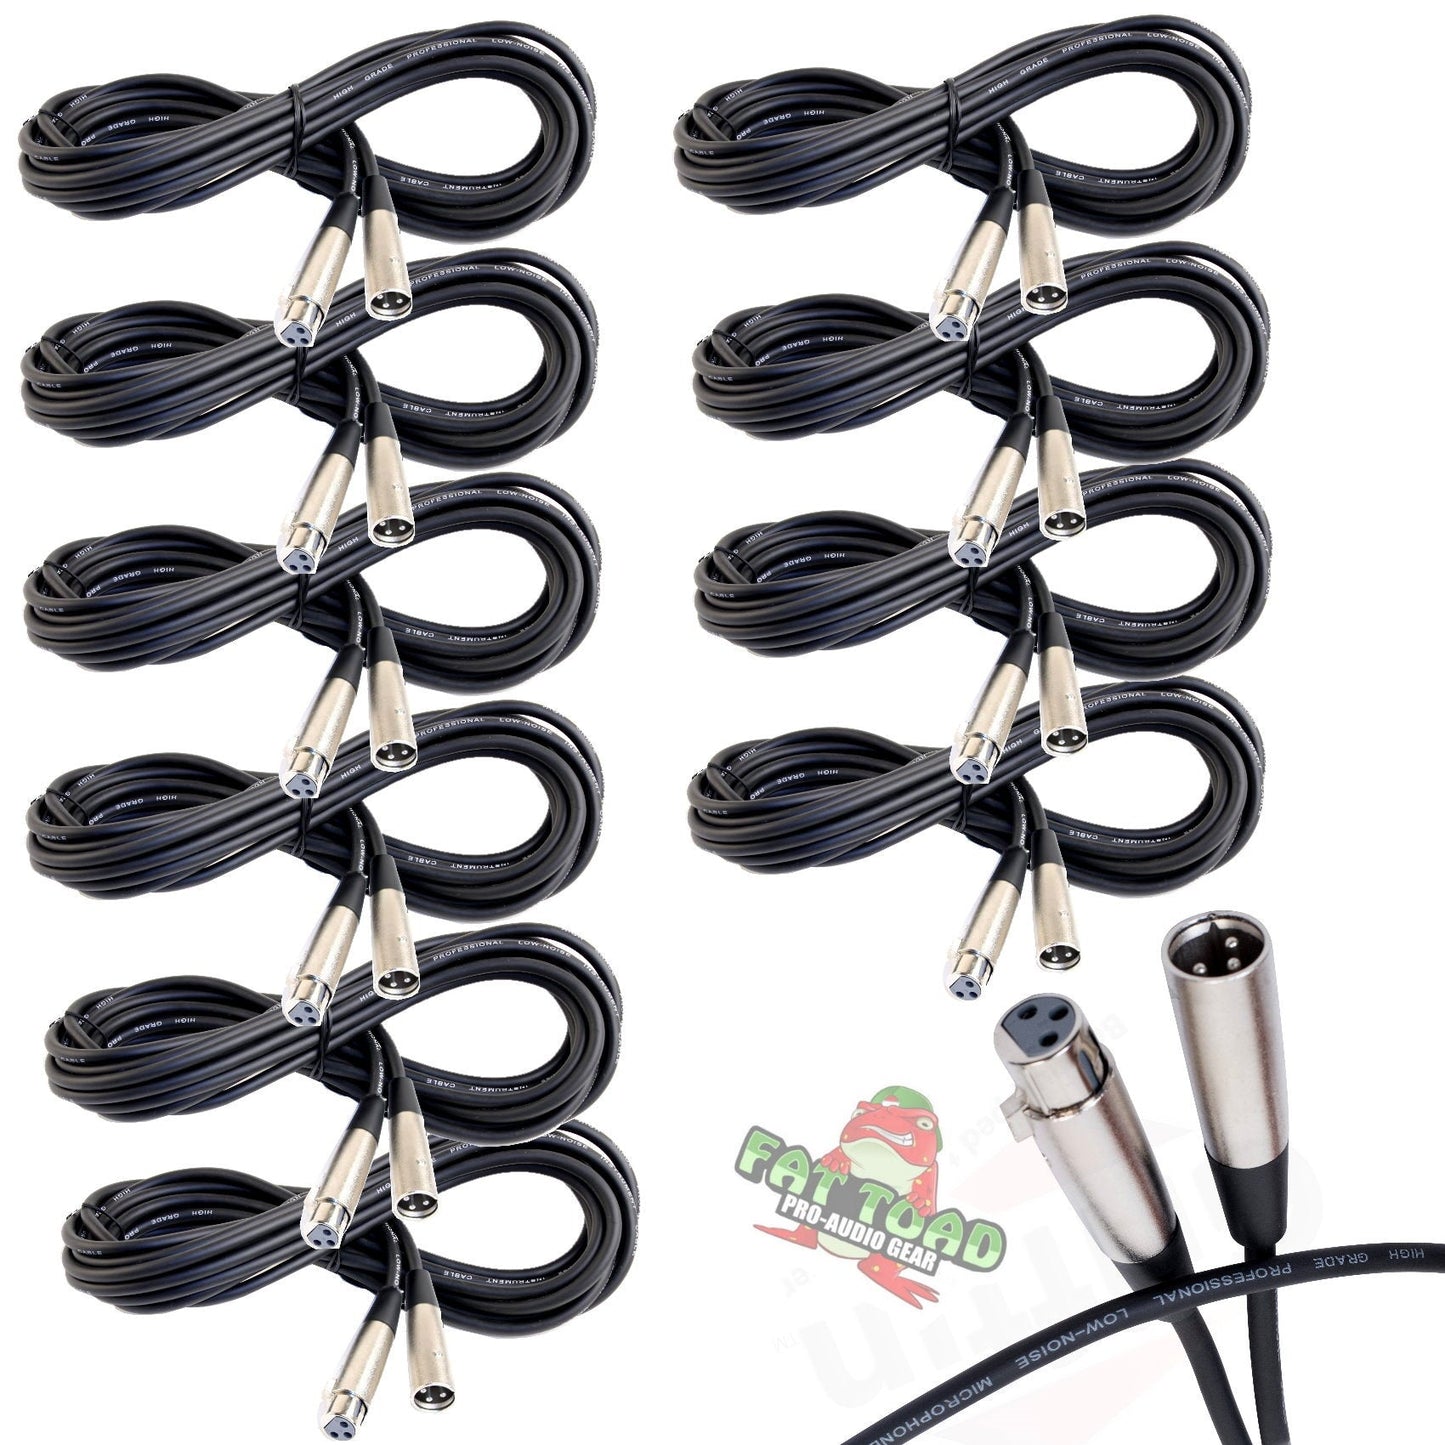 Microphone Cables by FAT TOAD (10 Pack) 20ft Professional Pro Audio XLR Mic Cord Patch Wires